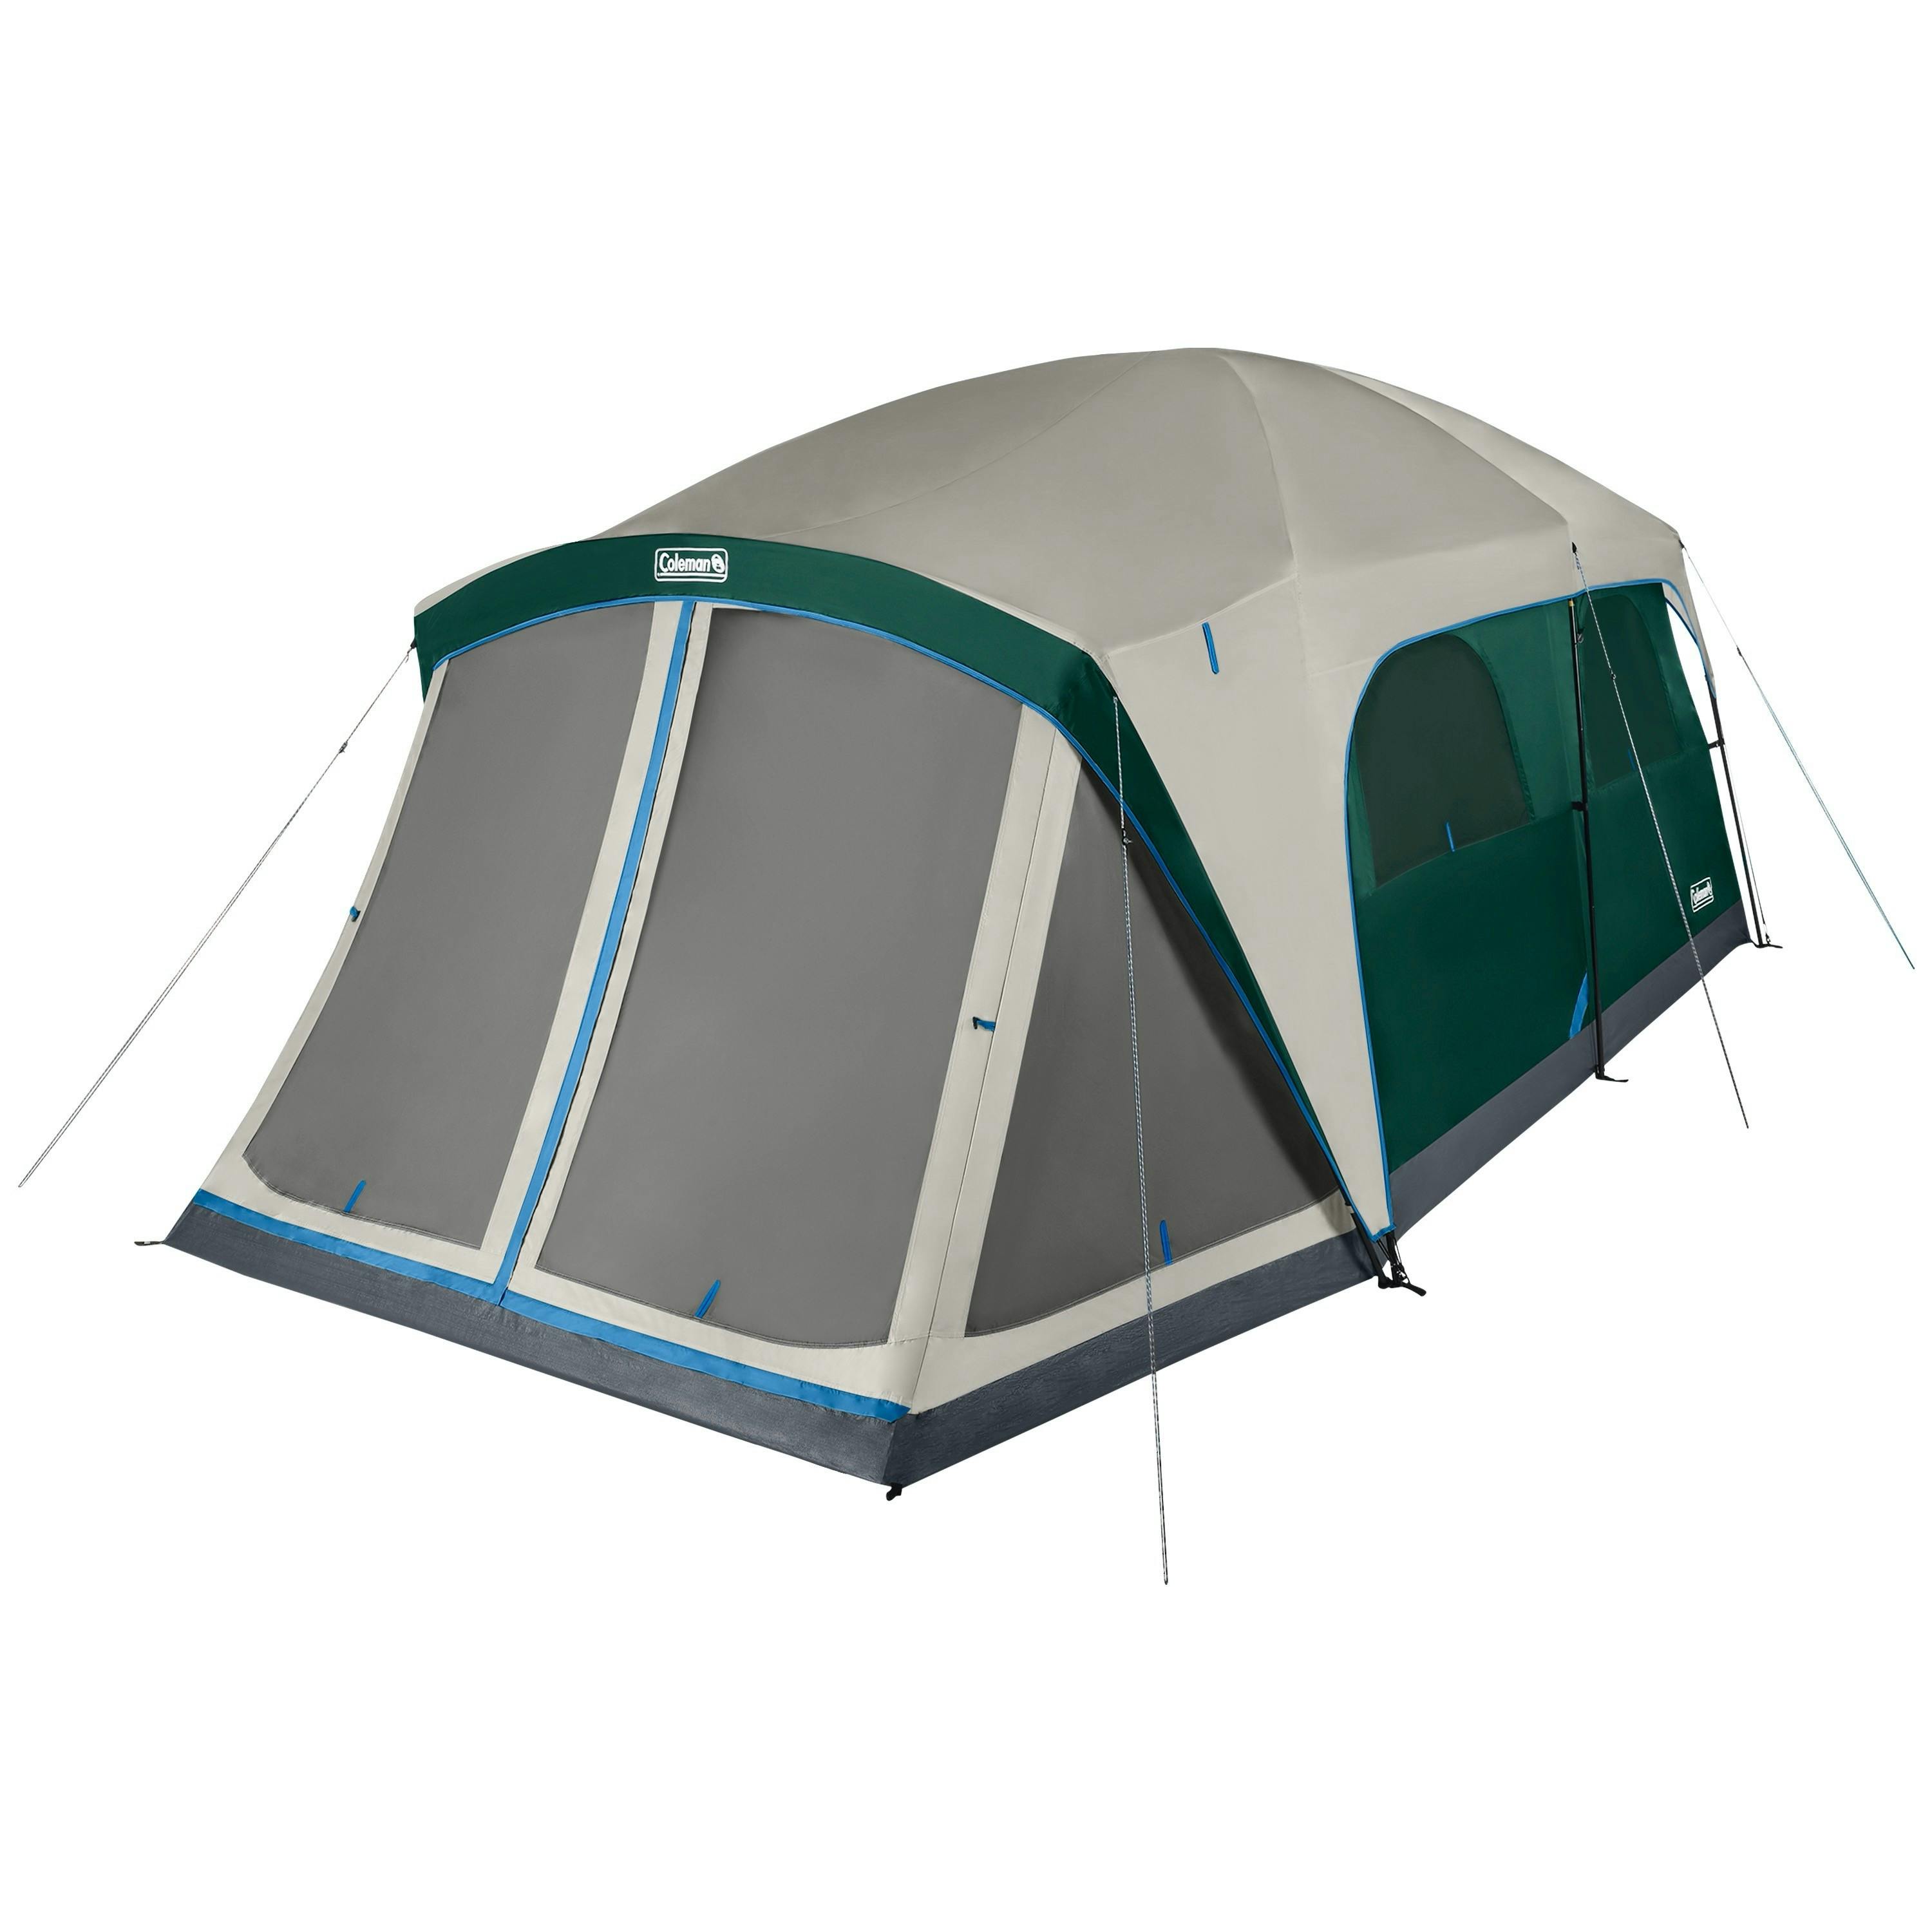 Auckland Condenseren Implicaties Coleman Skylodge Camping Tent with Screen Room | Curated.com